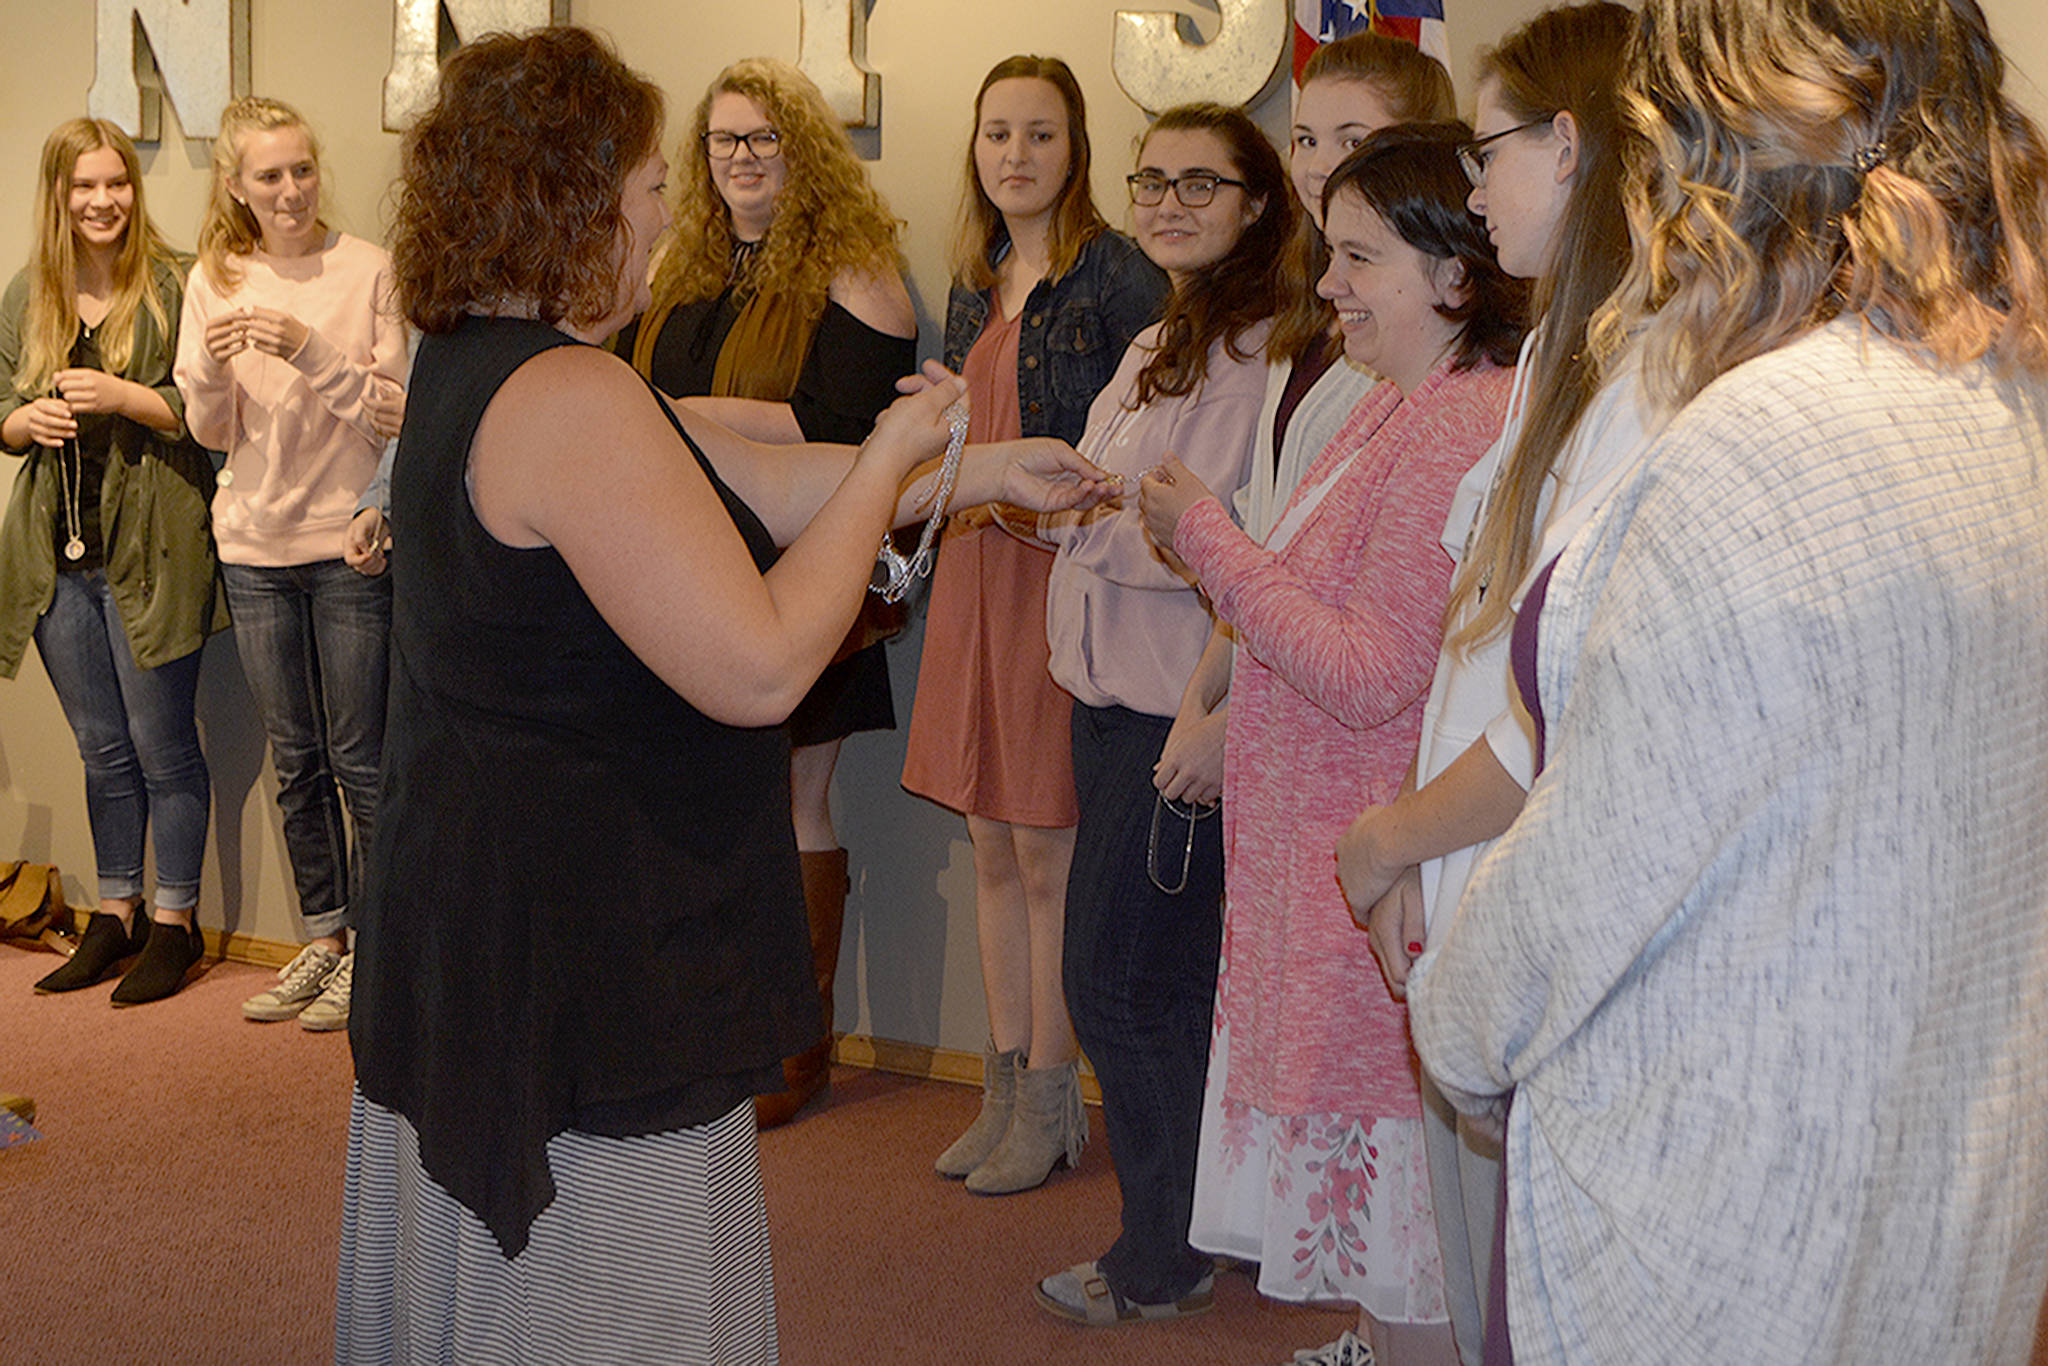 Nancy Schaut hands out “Wonder Woman” necklaces to Marysville high school graduates who received Soroptimist scholarships Tuesday. Schaut won one in 1988 and returned to the club to help the community. (Steve Powell/Staff Photo)